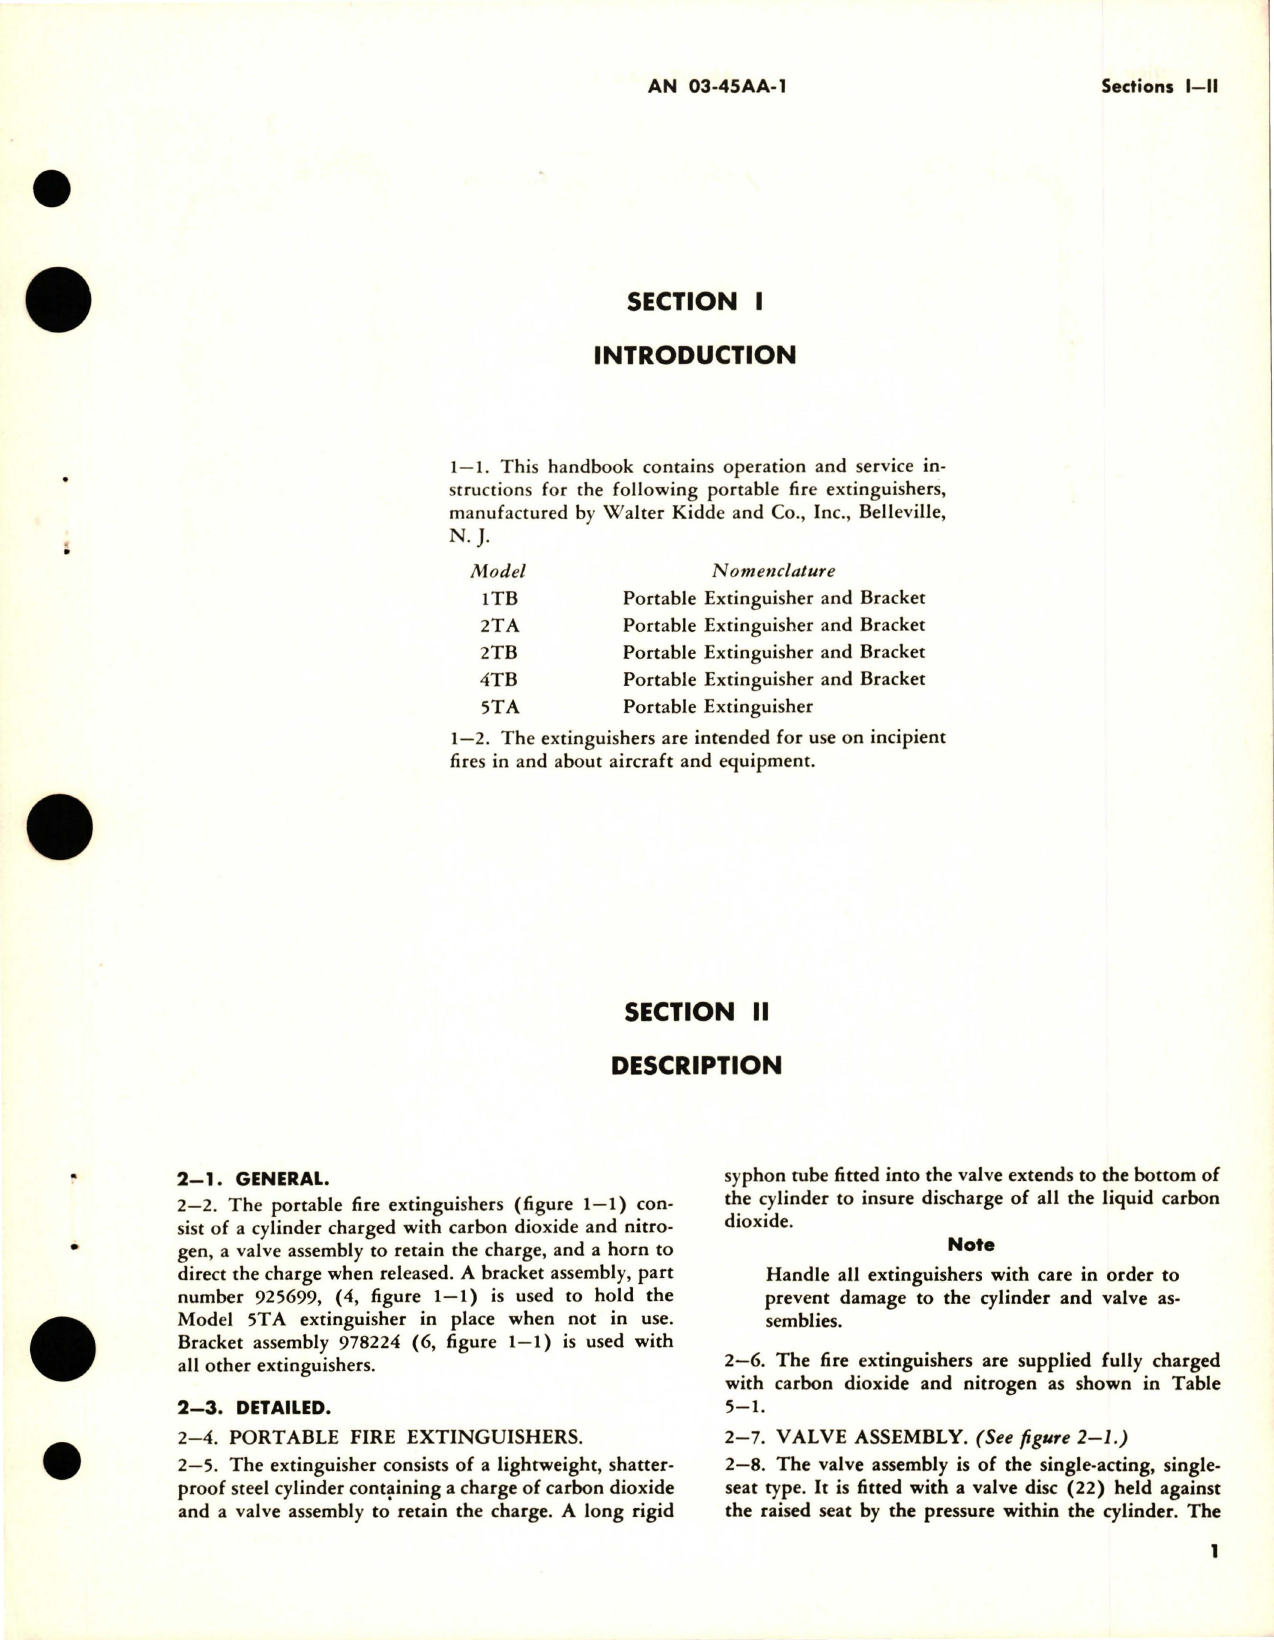 Sample page 5 from AirCorps Library document: Operation and Service Instructions for Airborne CO2 Portable Fire Extinguishers - Models 1TB, 2TA, 2TB, 4TB, and 5TA